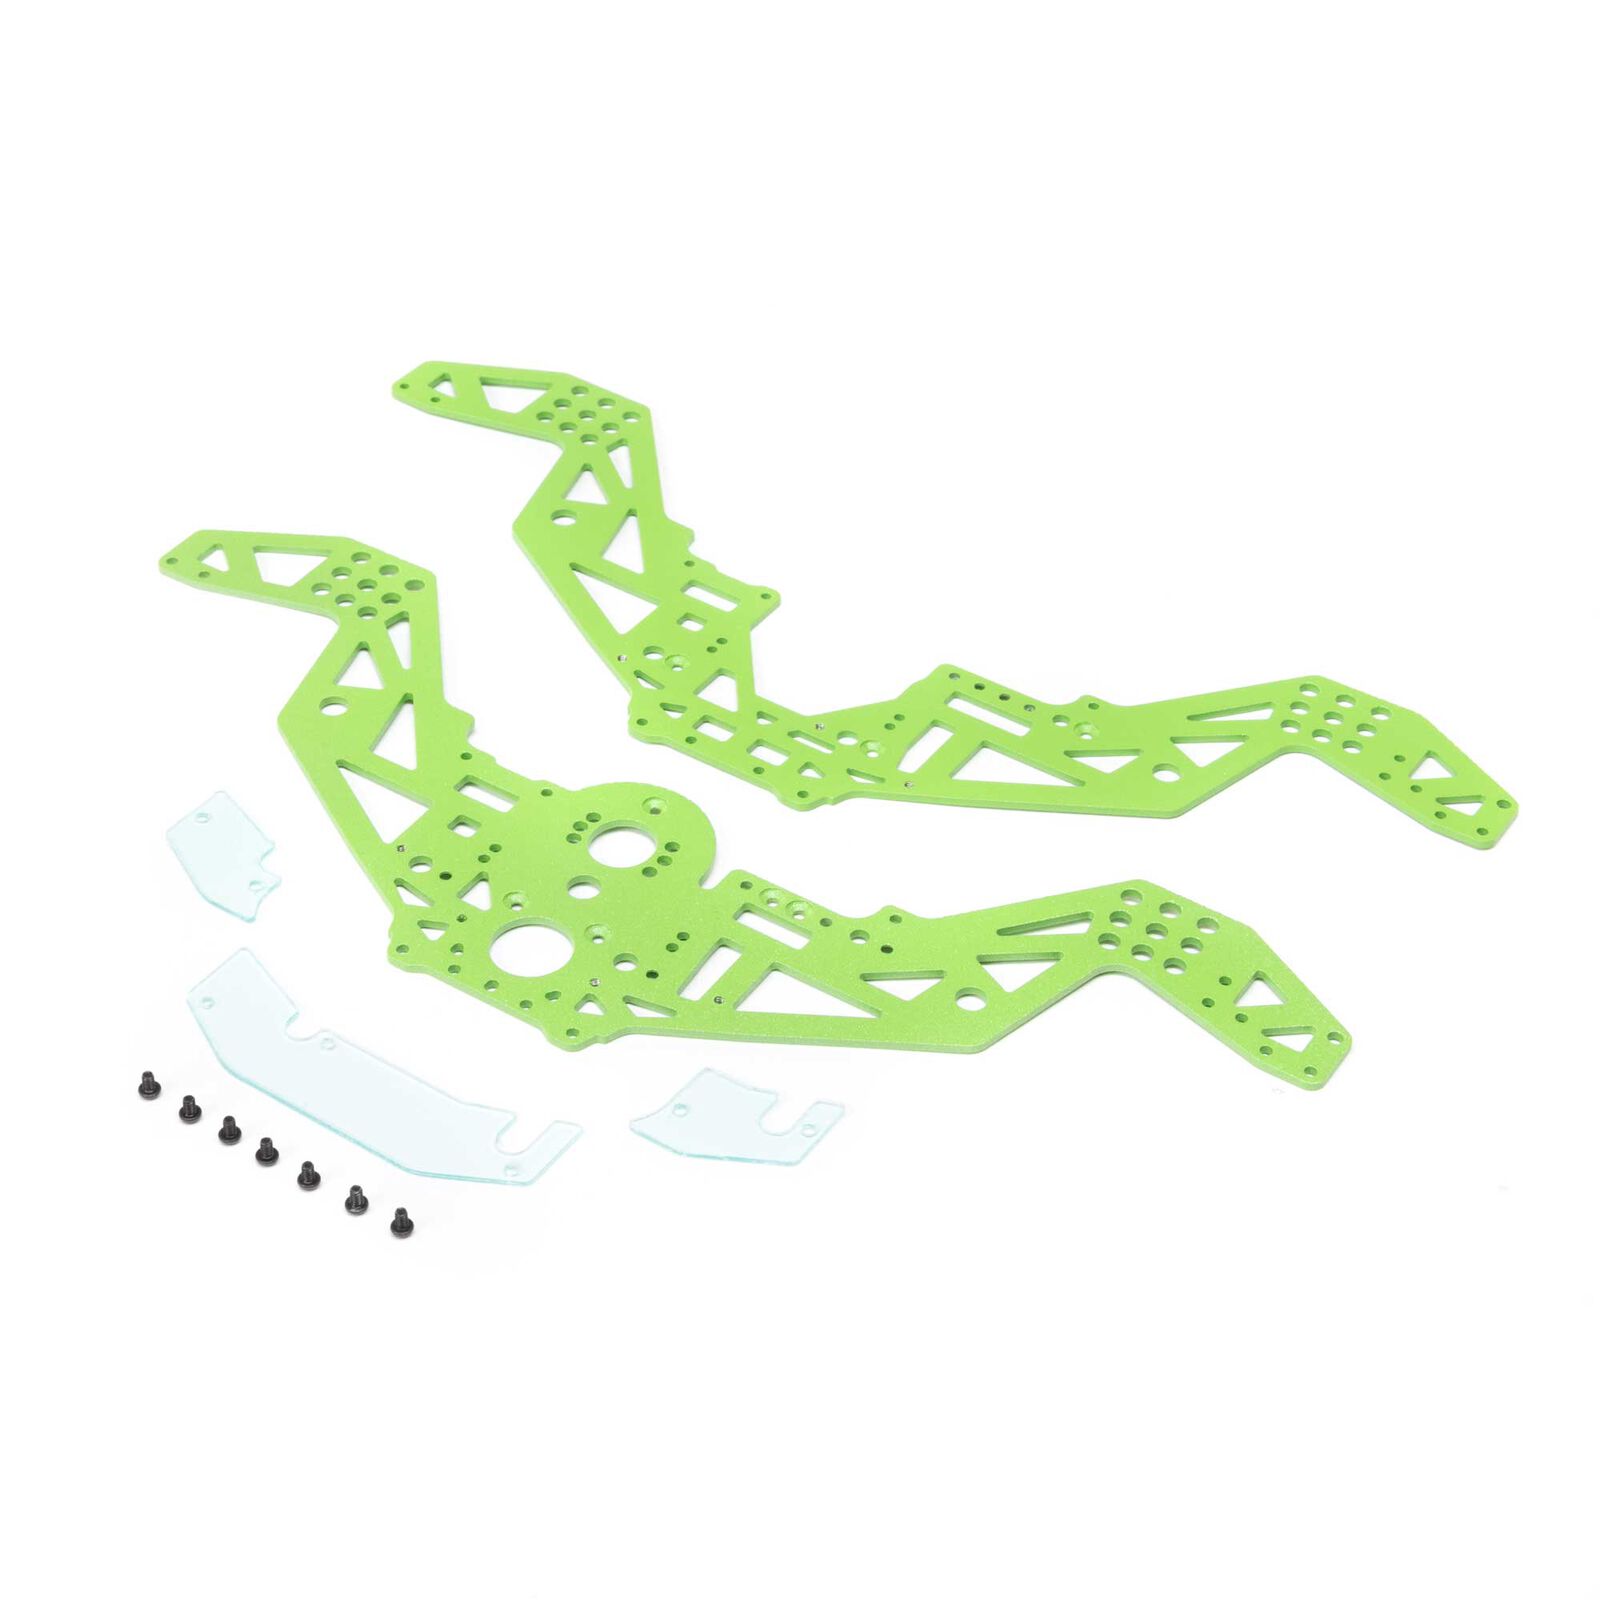 Chassis Plate Set, Green: Mini LMT